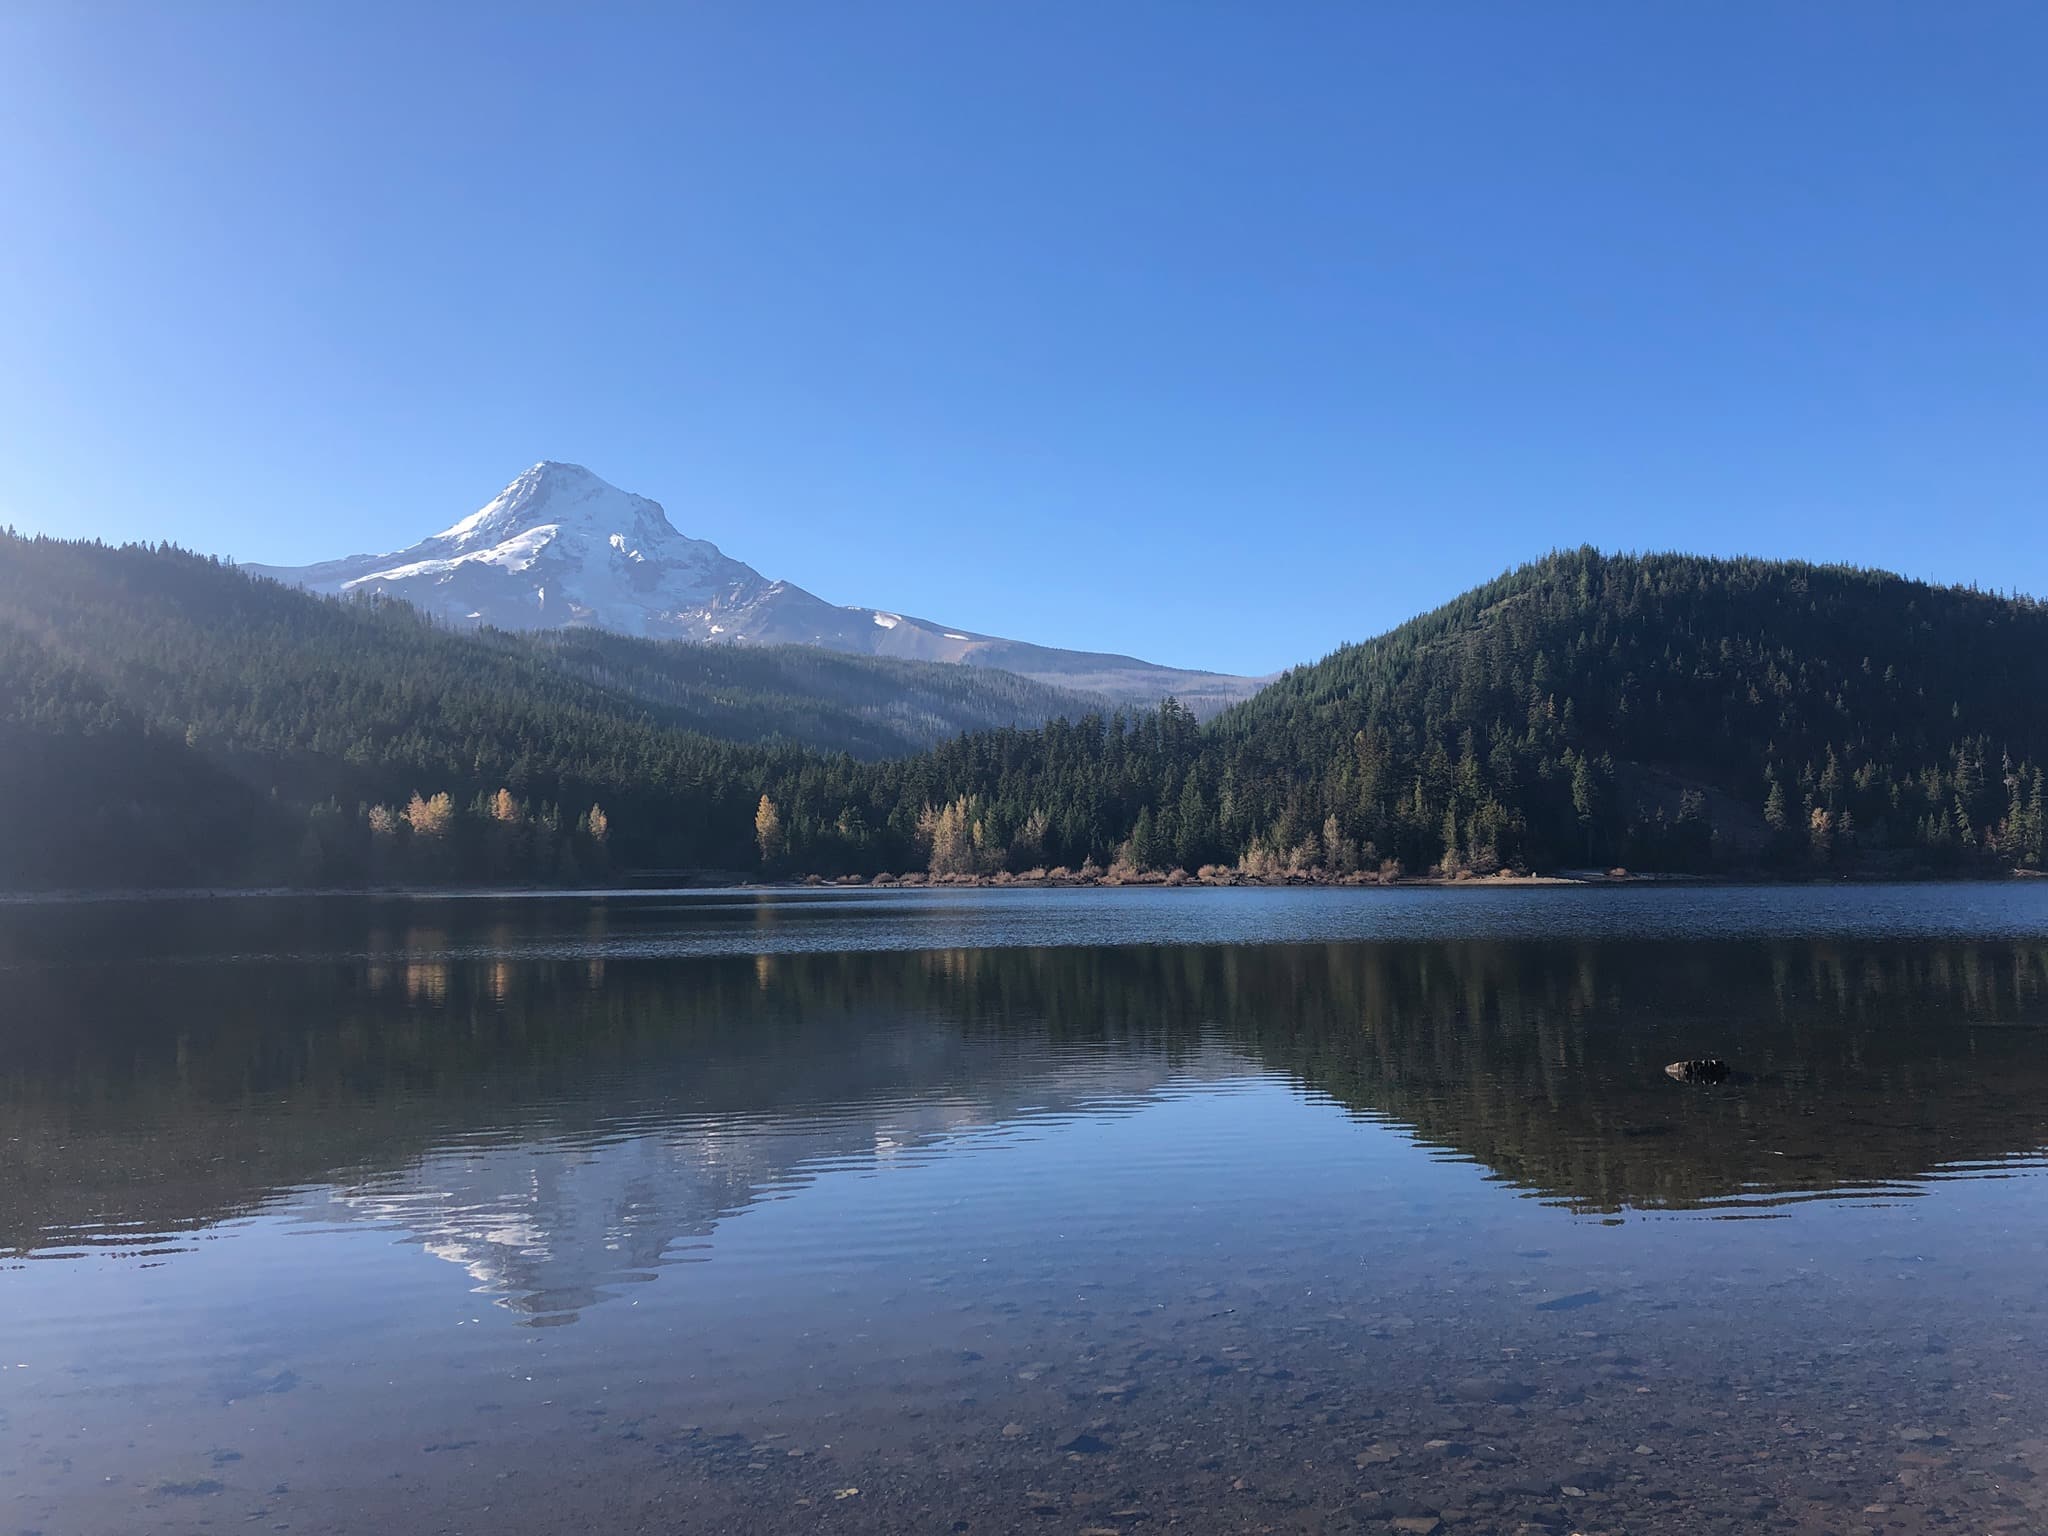 Clear blue skies and a Mt Hood reflection in Laurance Lake